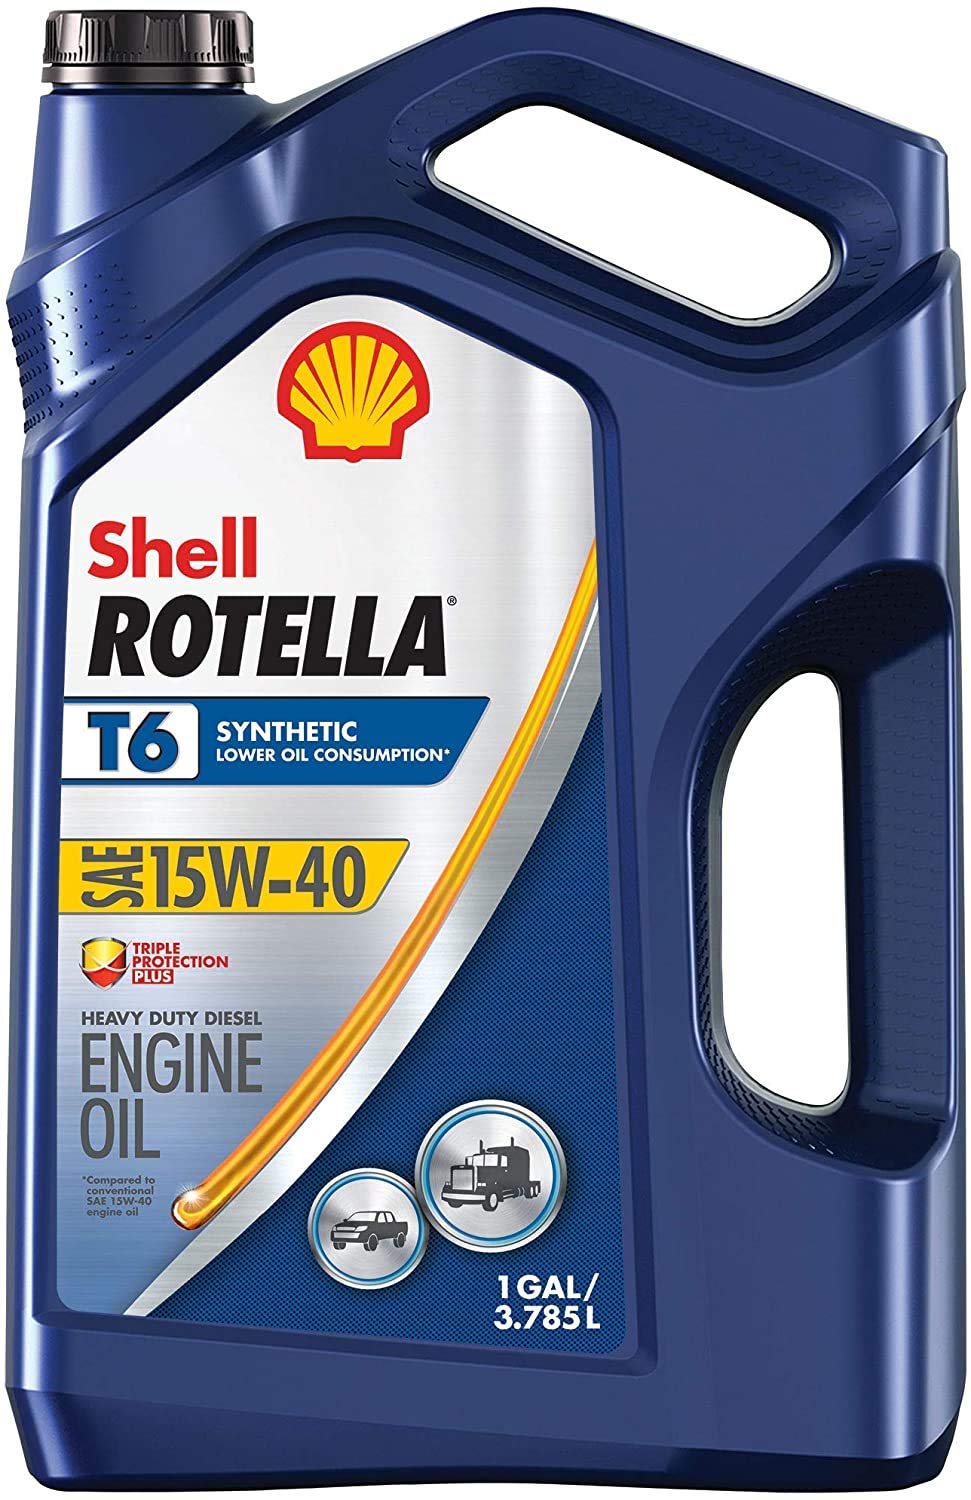 Shell Rotella Huile moteur diesel entièrement synthétiq...